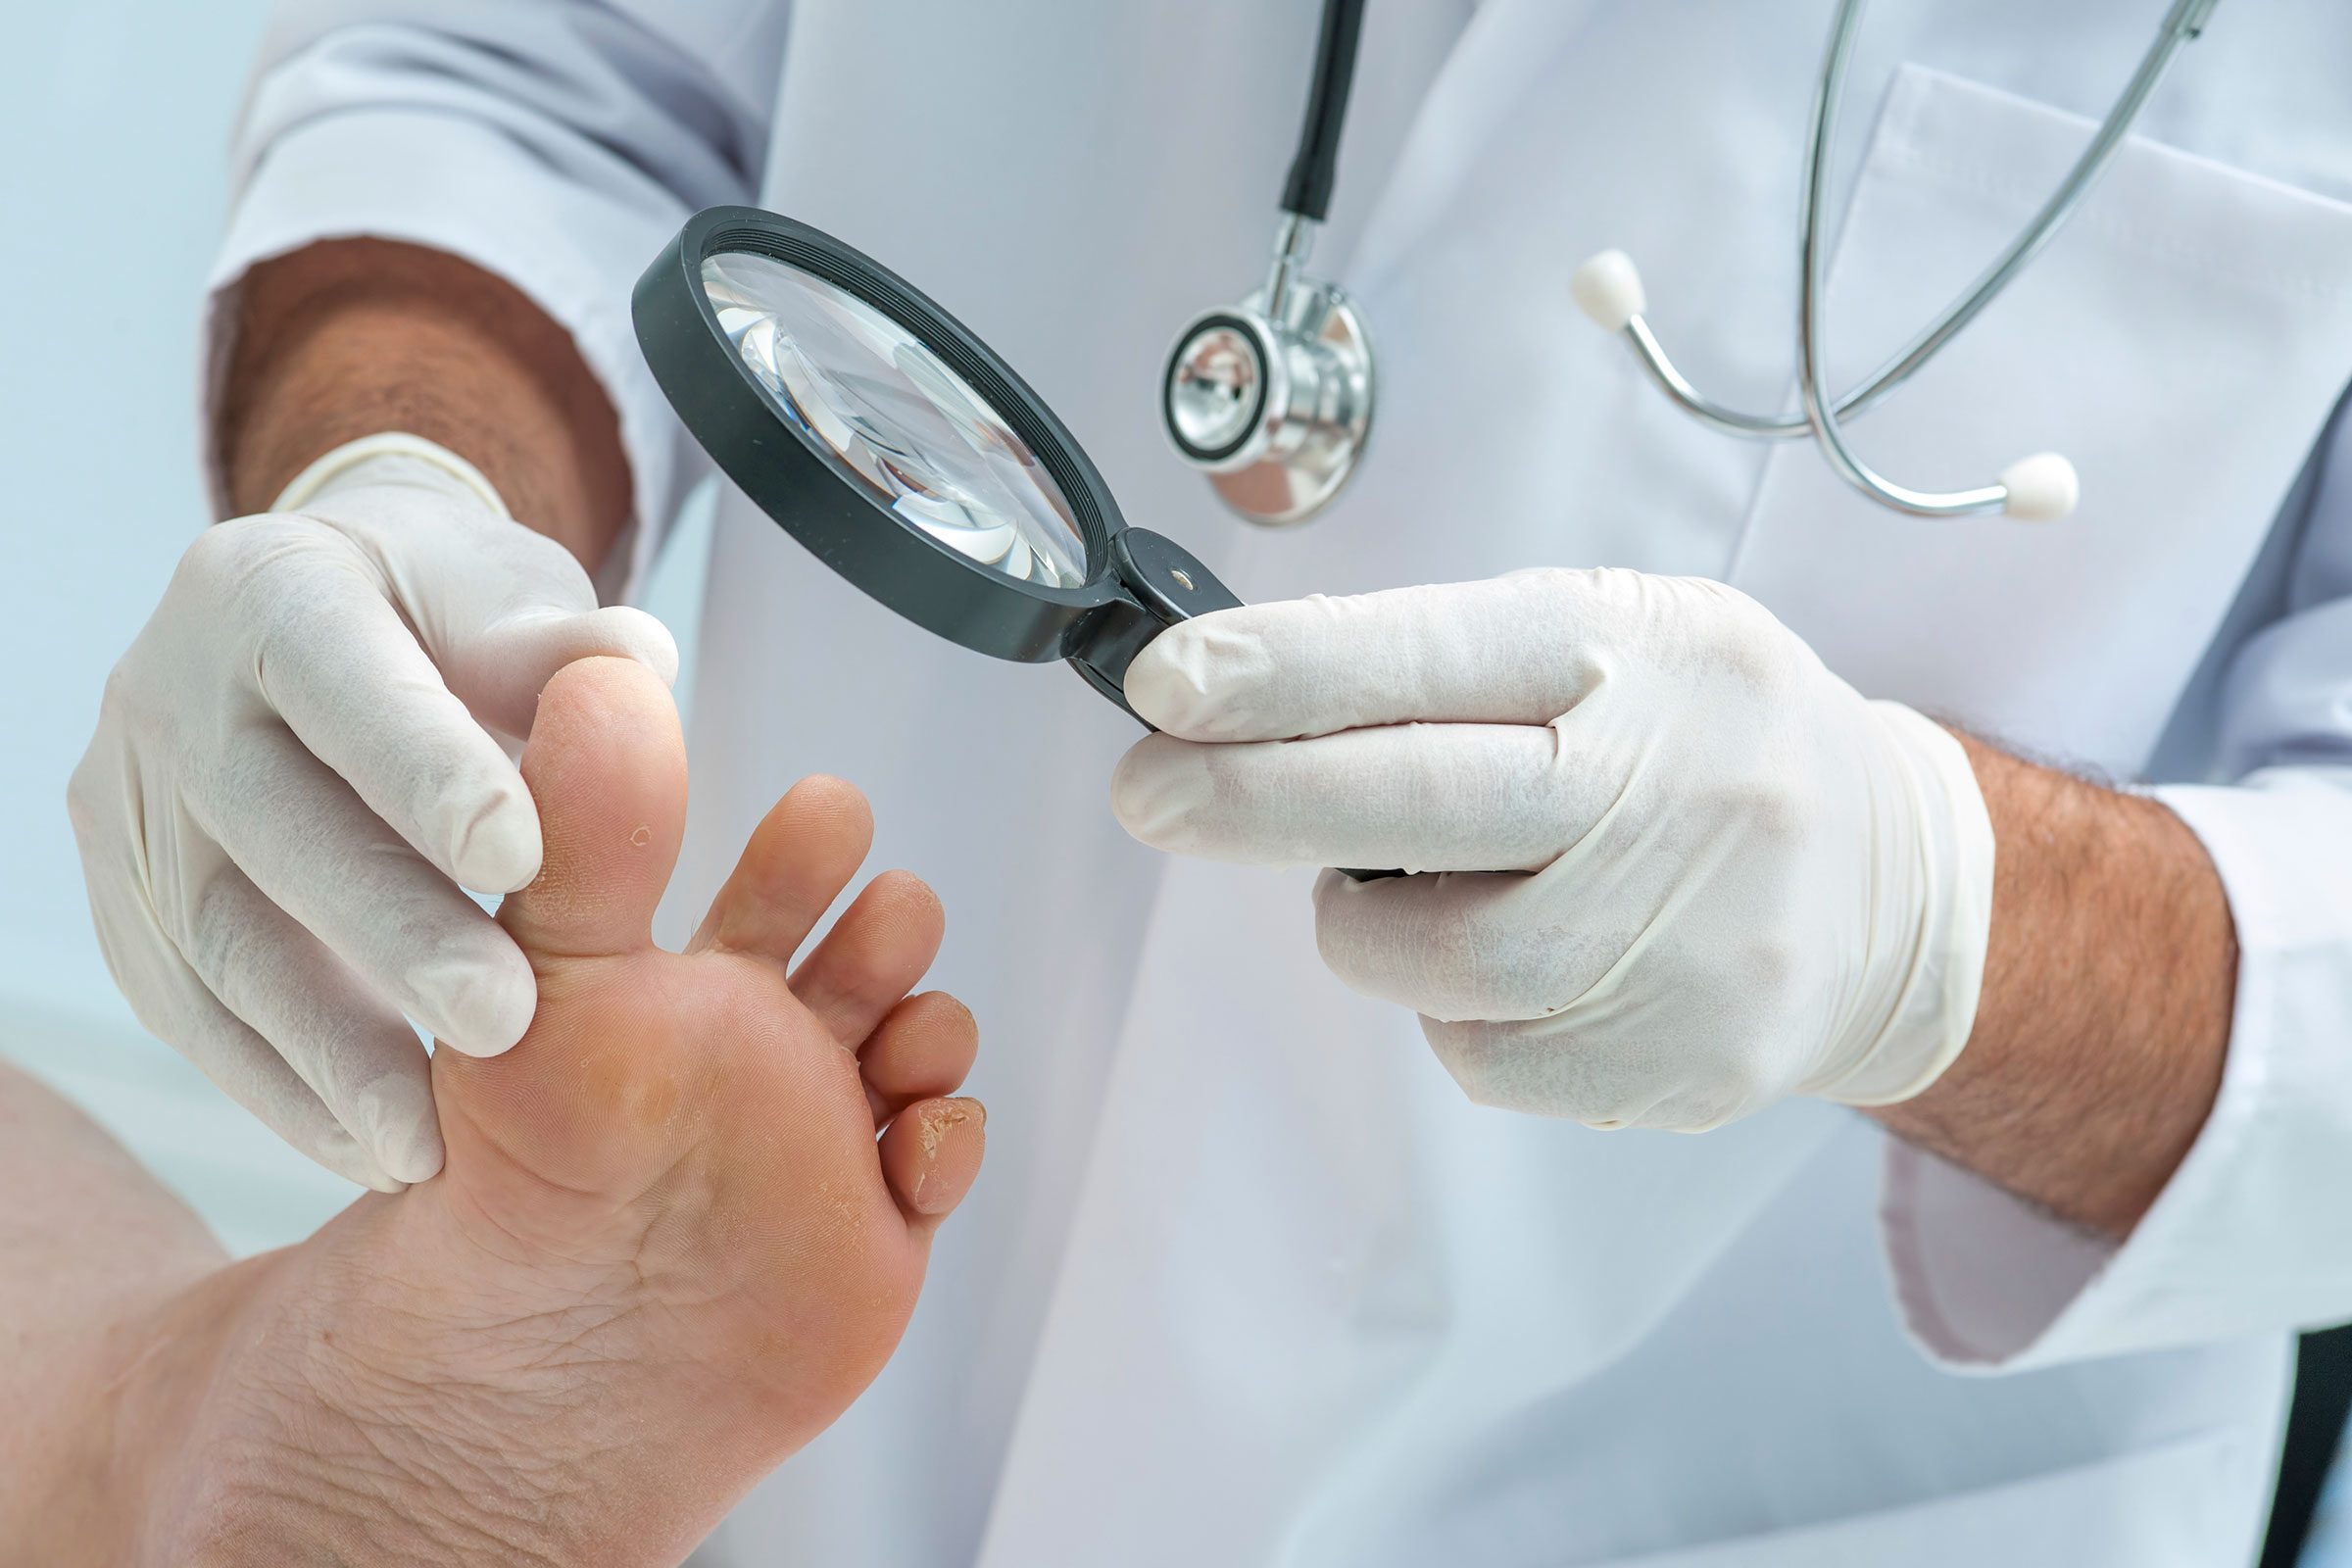 10 Subtle Signs of Disease Your Feet Can Reveal